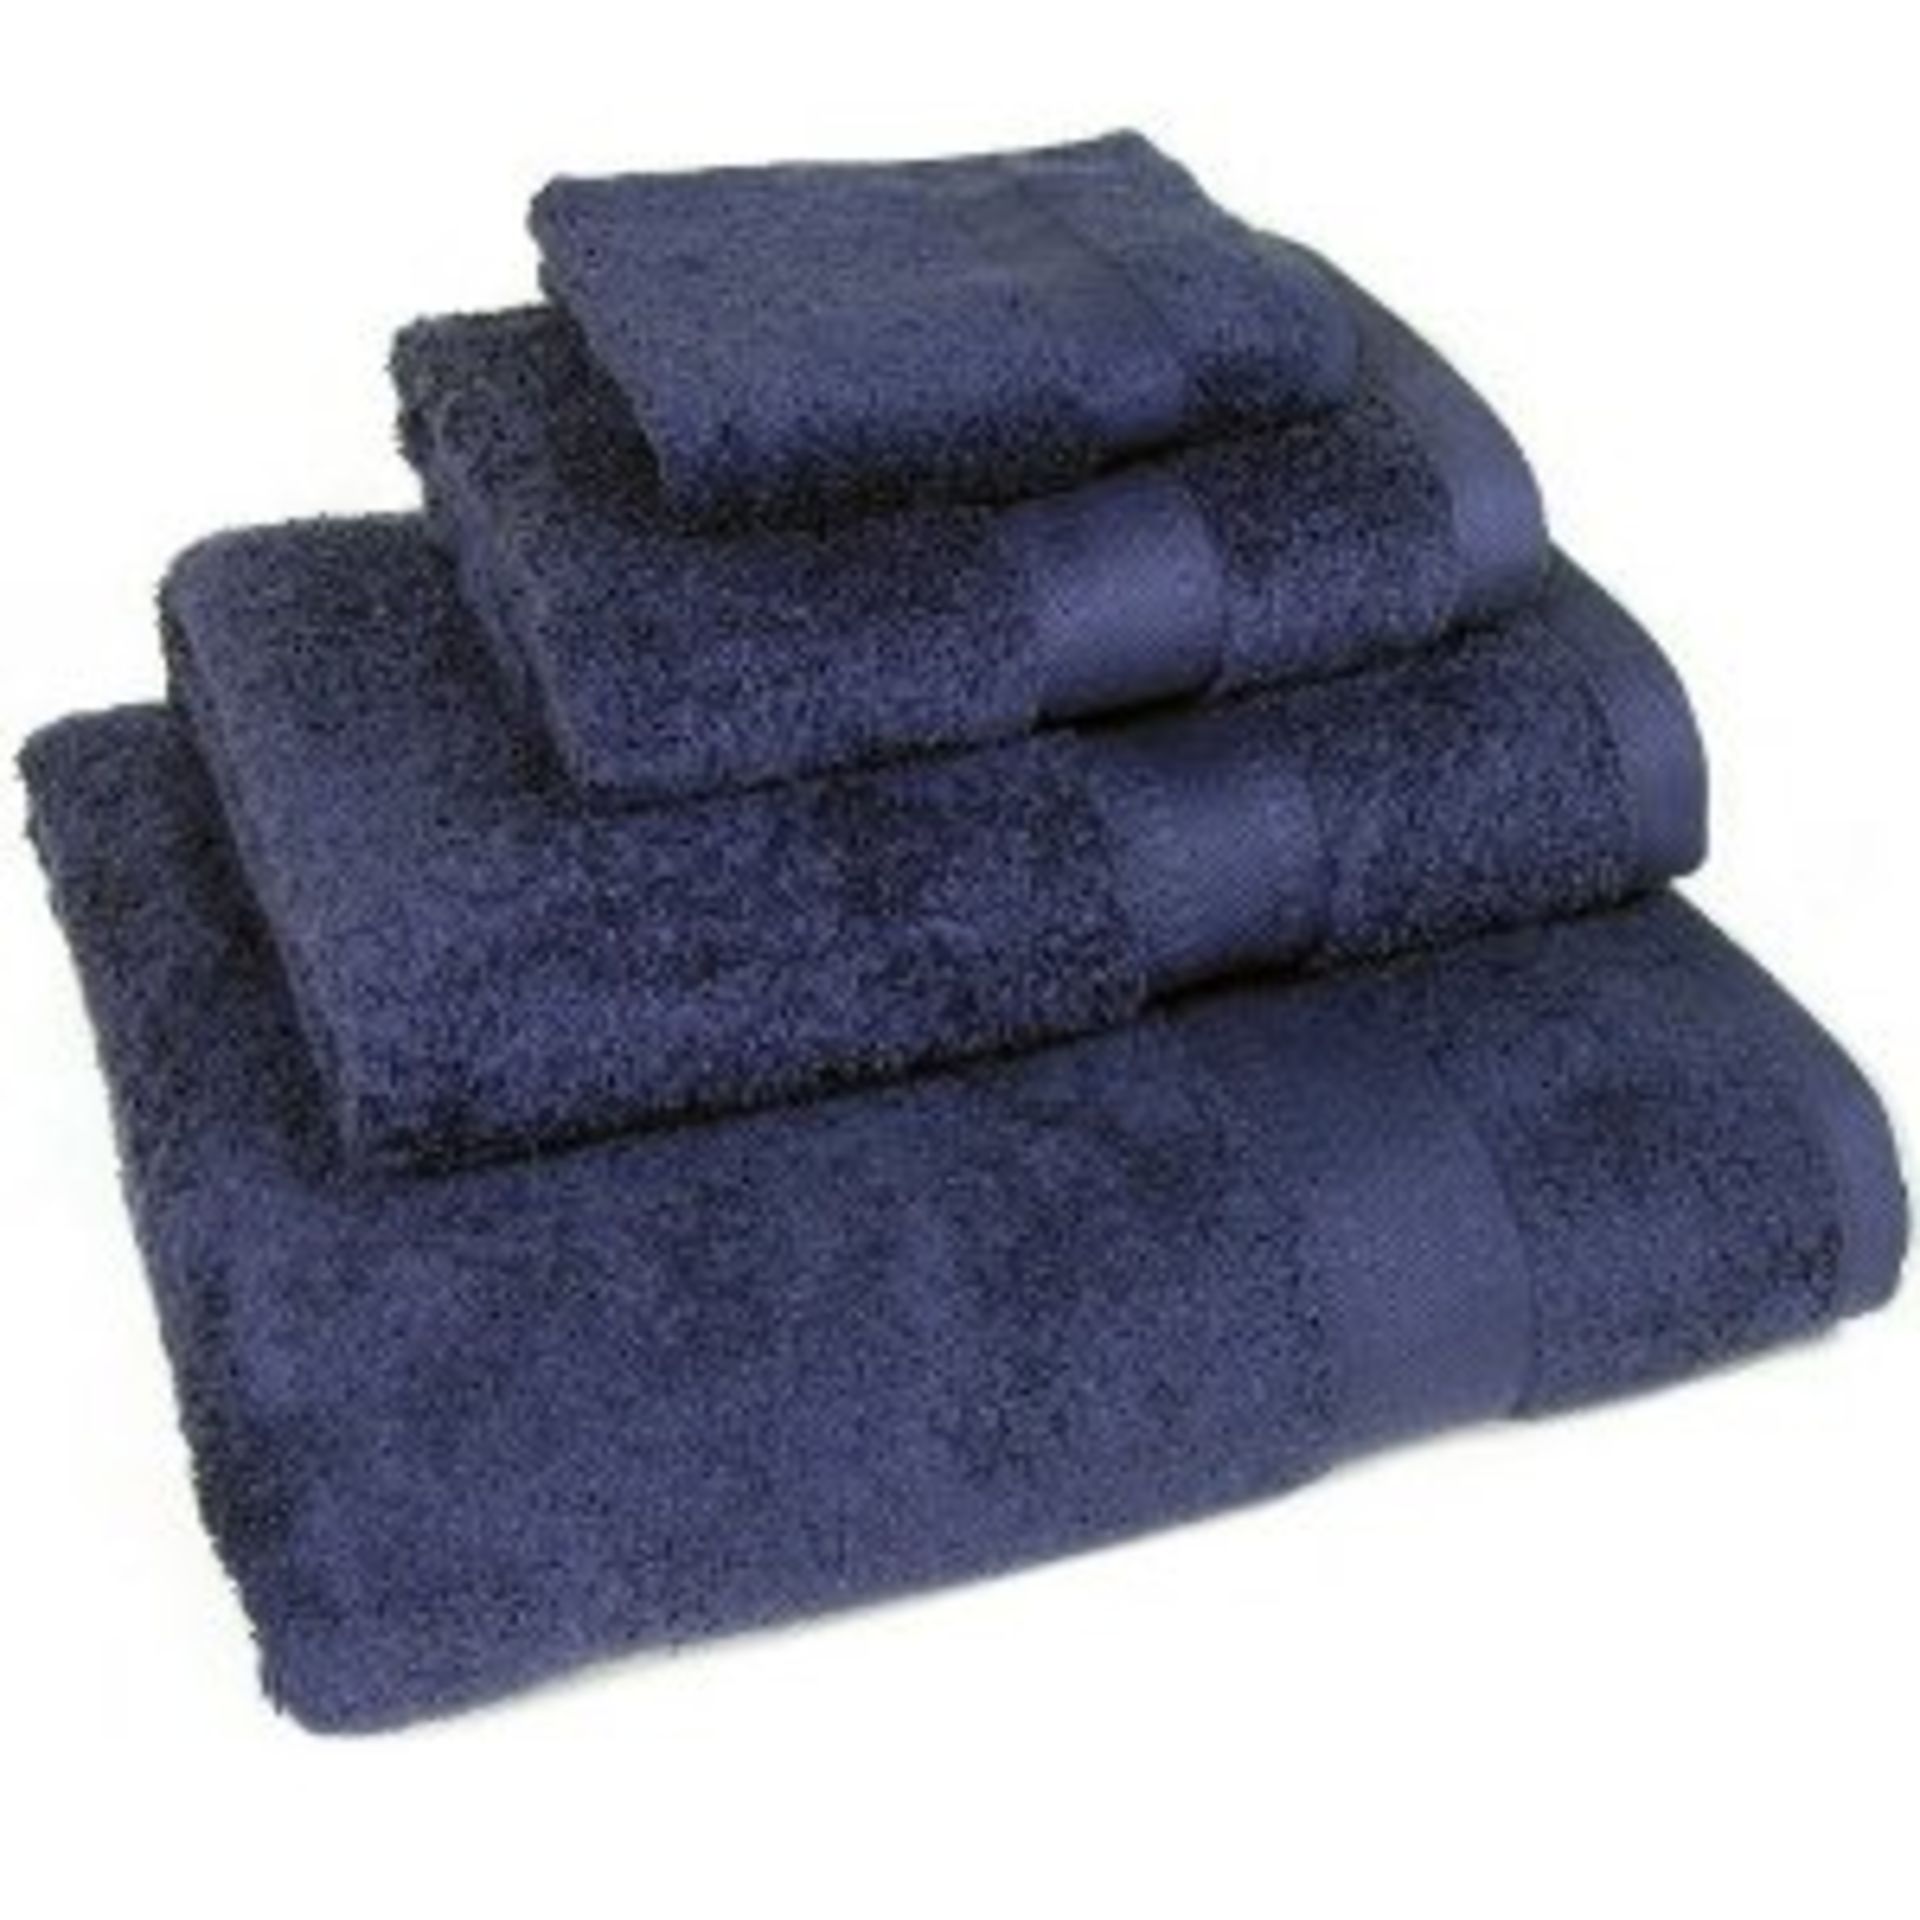 V Brand New Blue Six Piece Towel Bale Set Includes 2 Bath Towels 2 Hand Towels and 2 Face Towels X 2